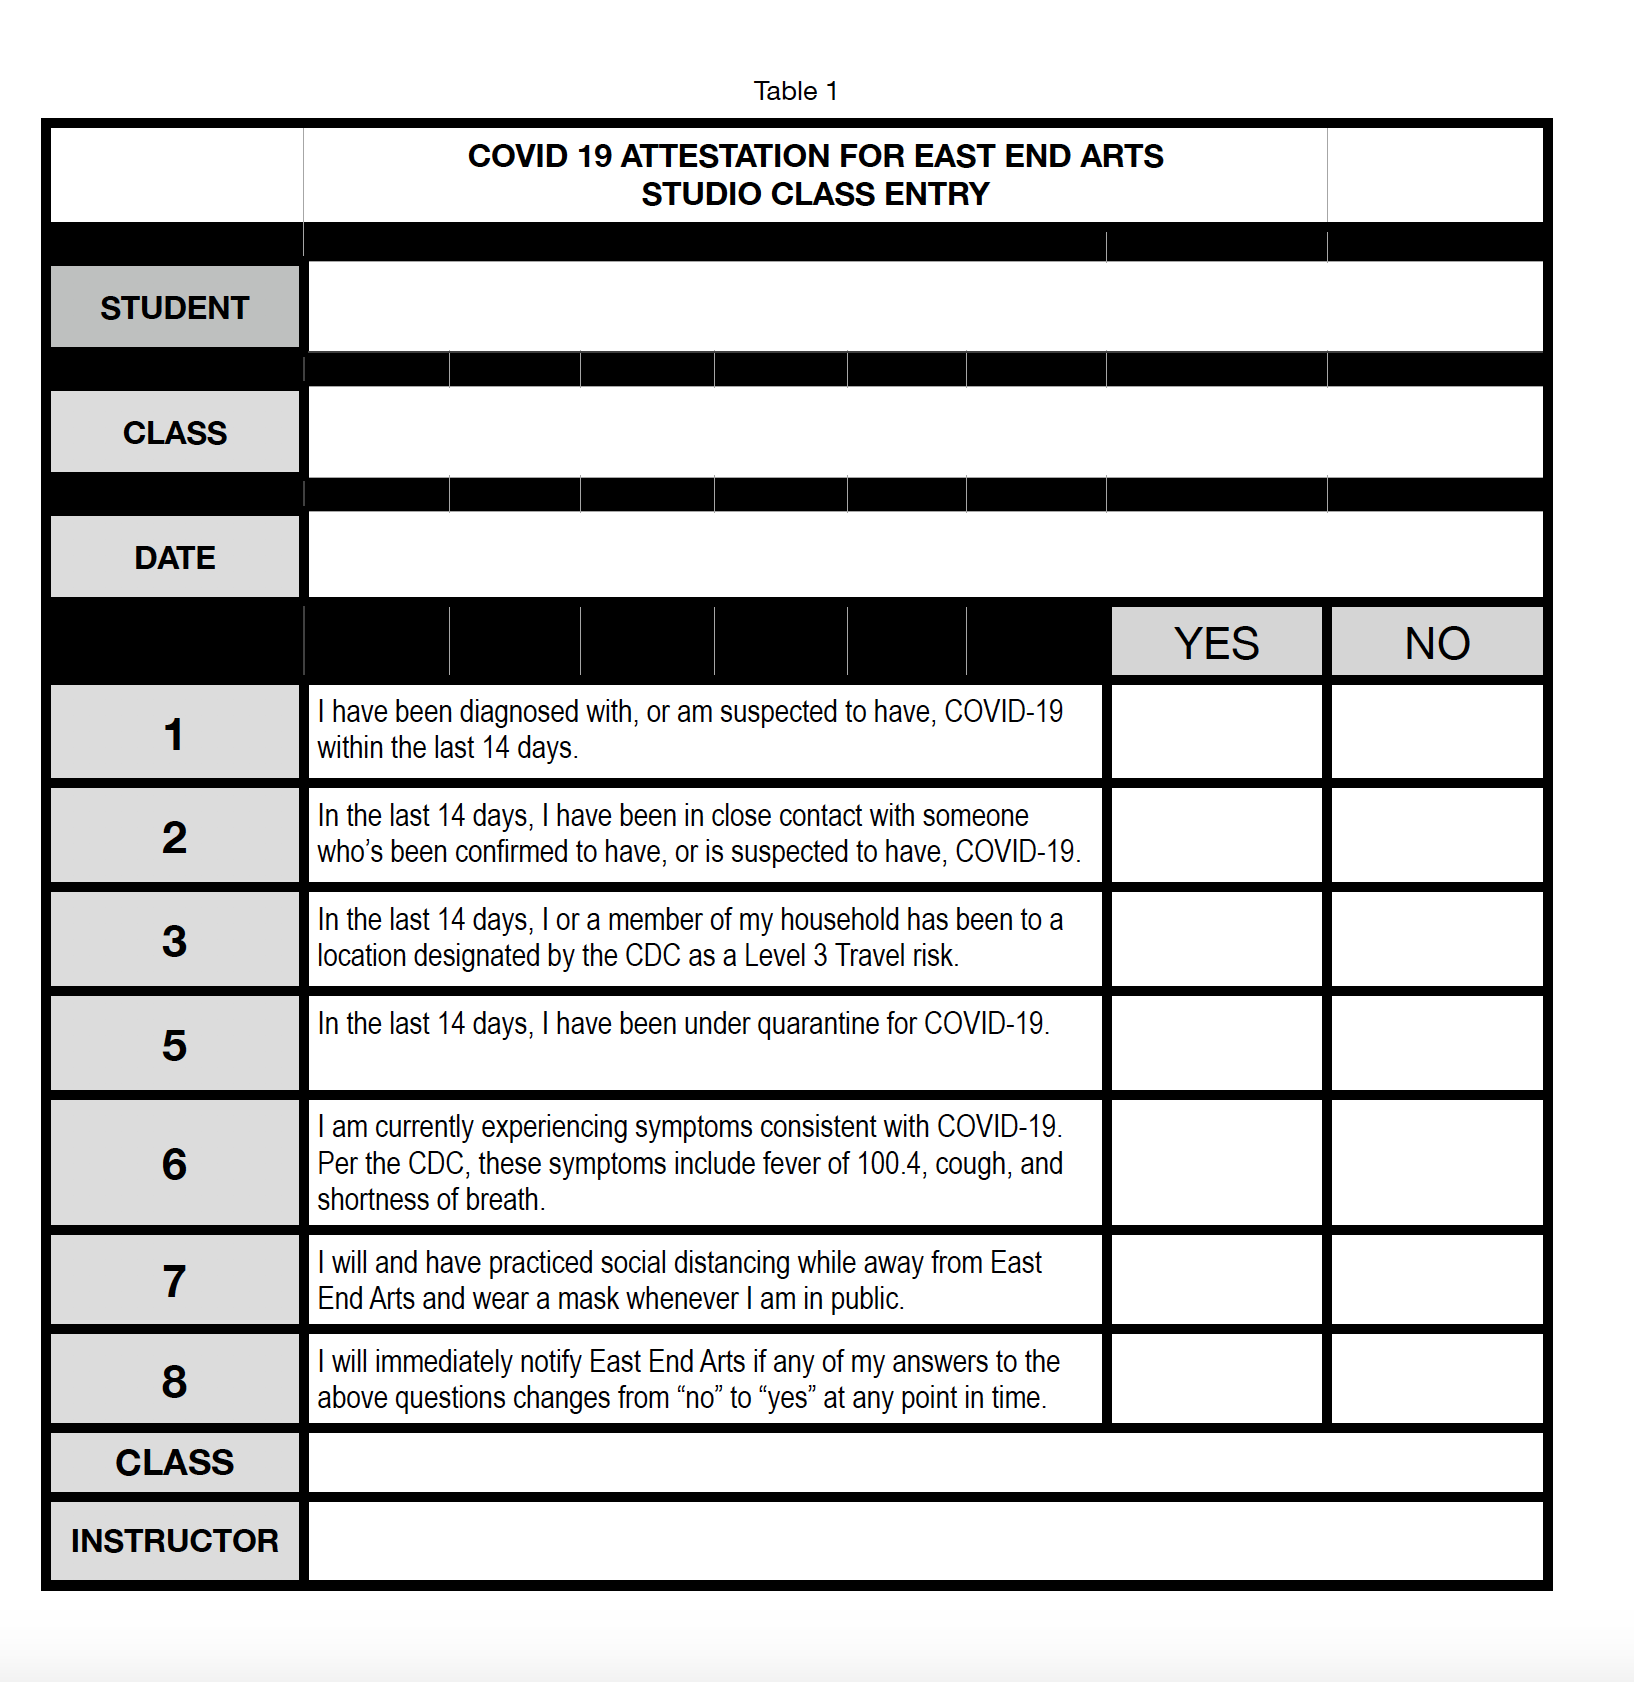 Click here to print the COVID-19 attestation form